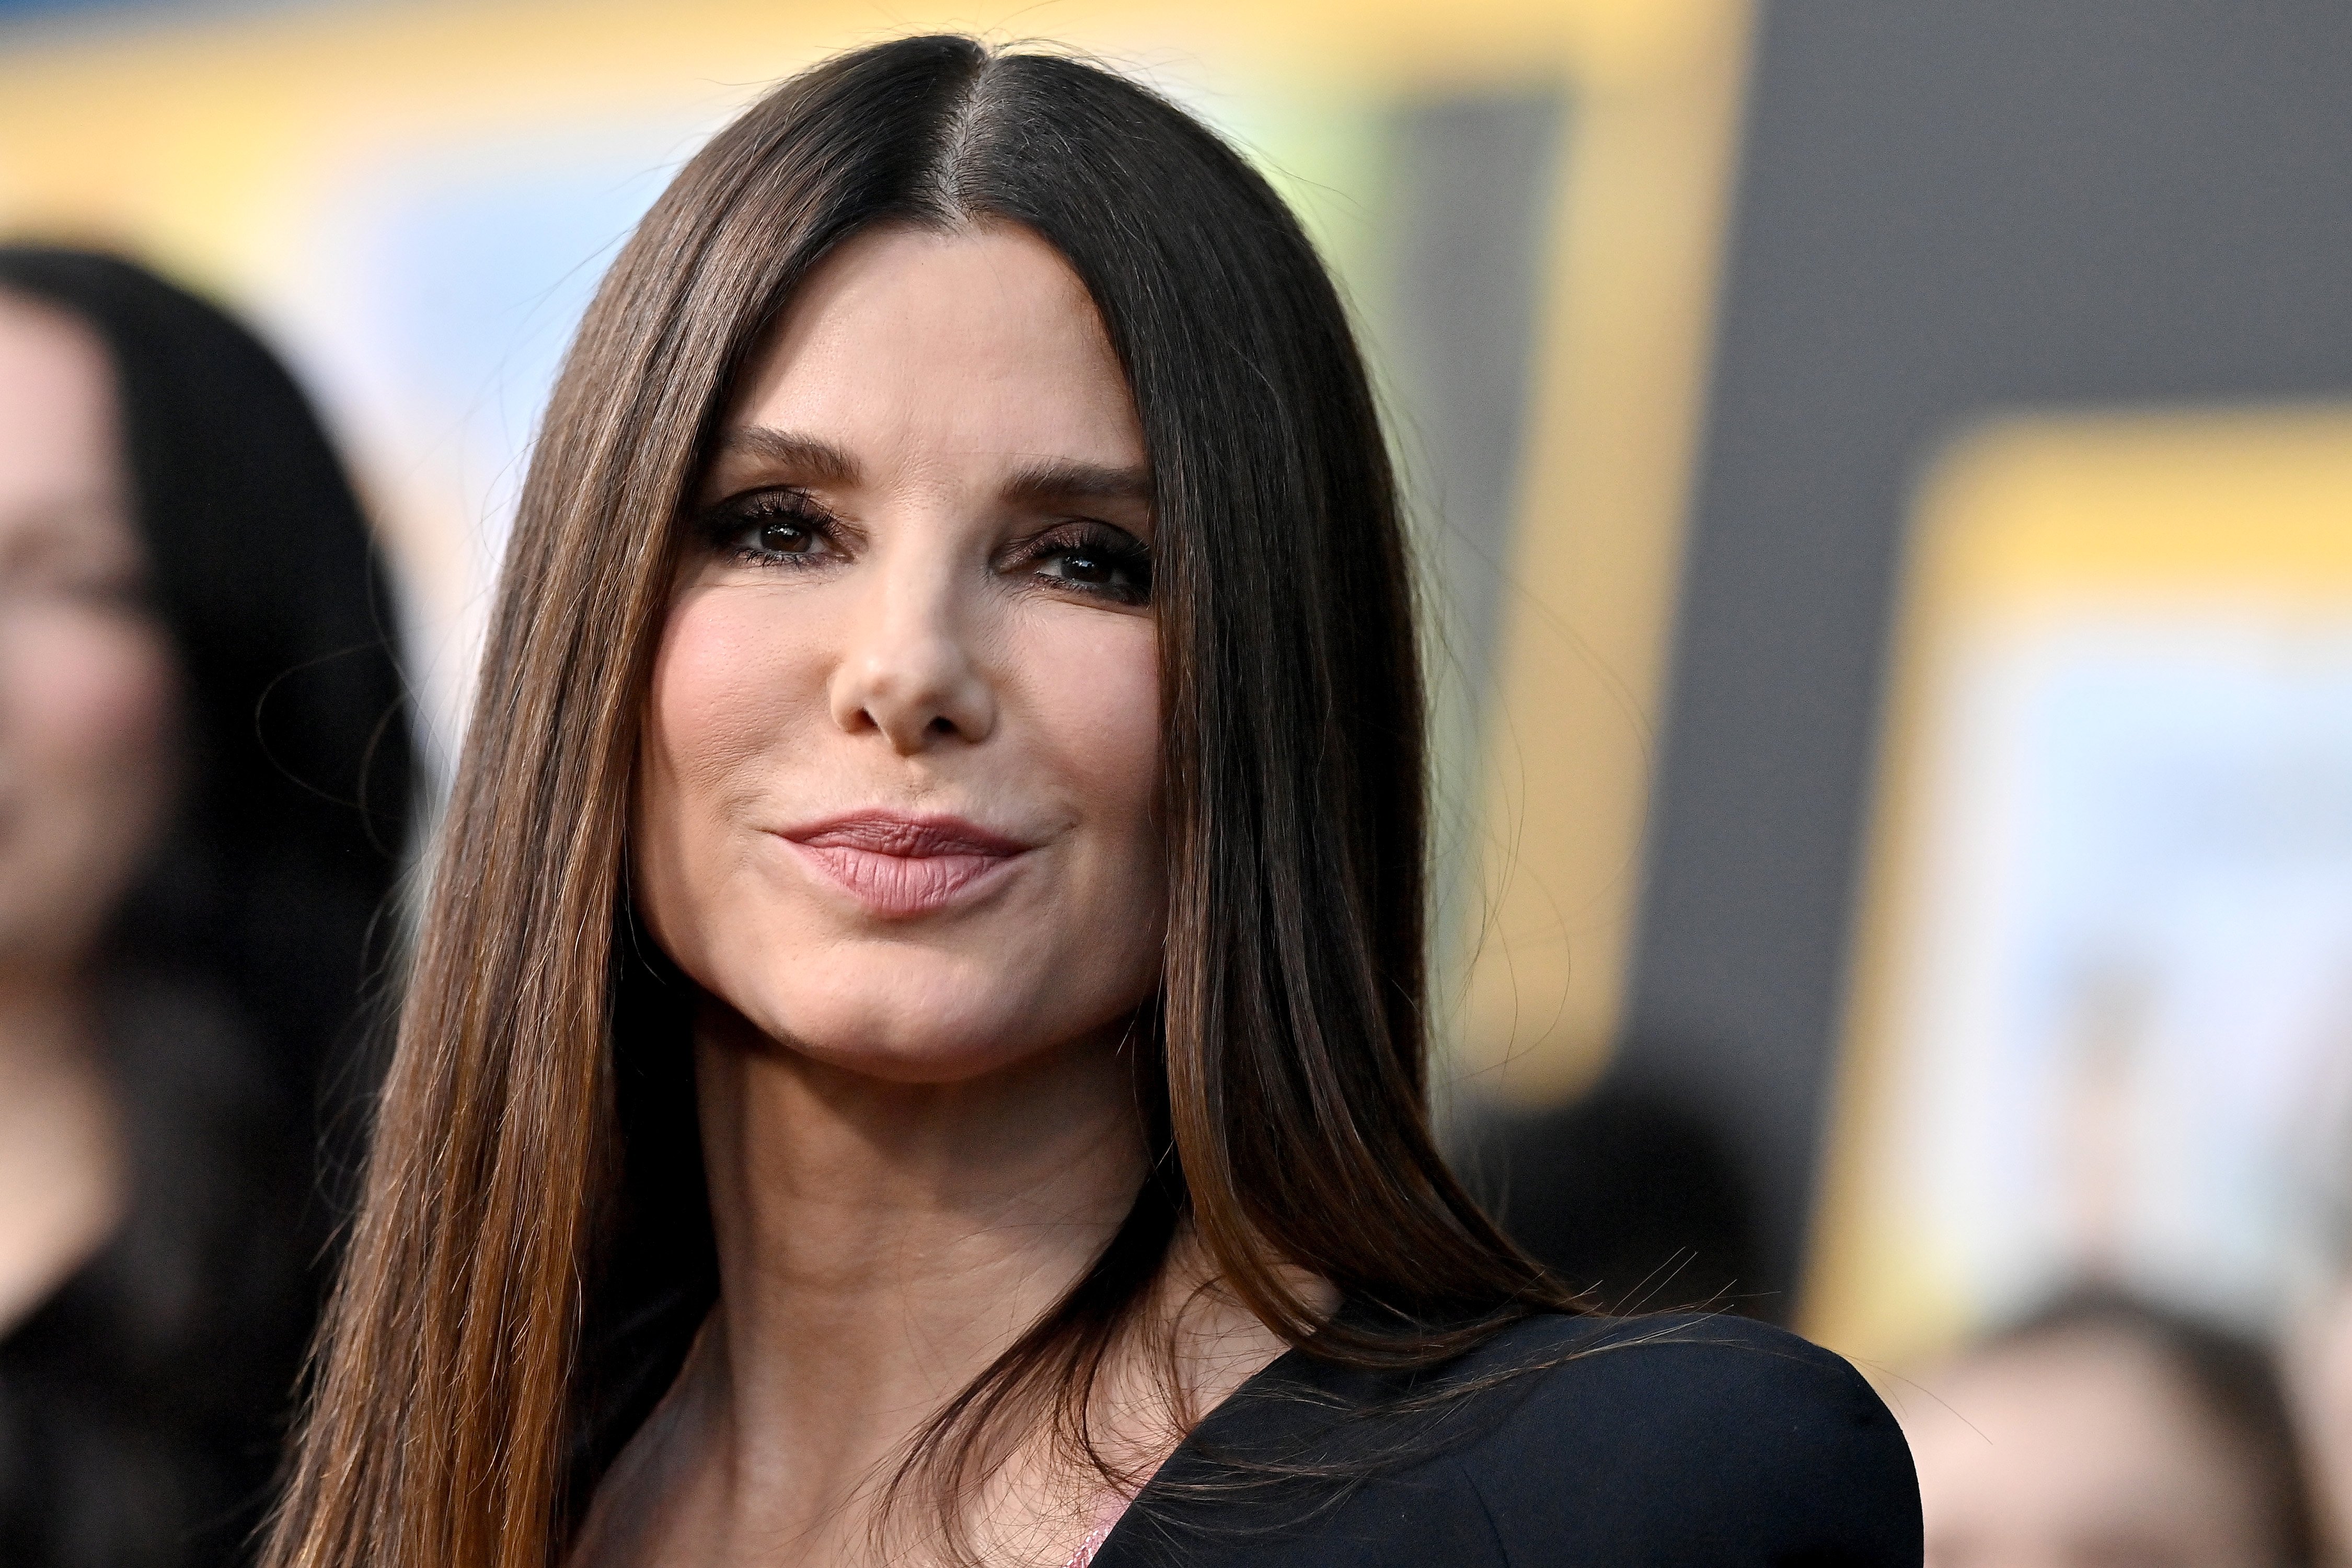 Sandra Bullock at Regency Village Theatre on March 21, 2022, in Los Angeles, California. | Source: Getty Images